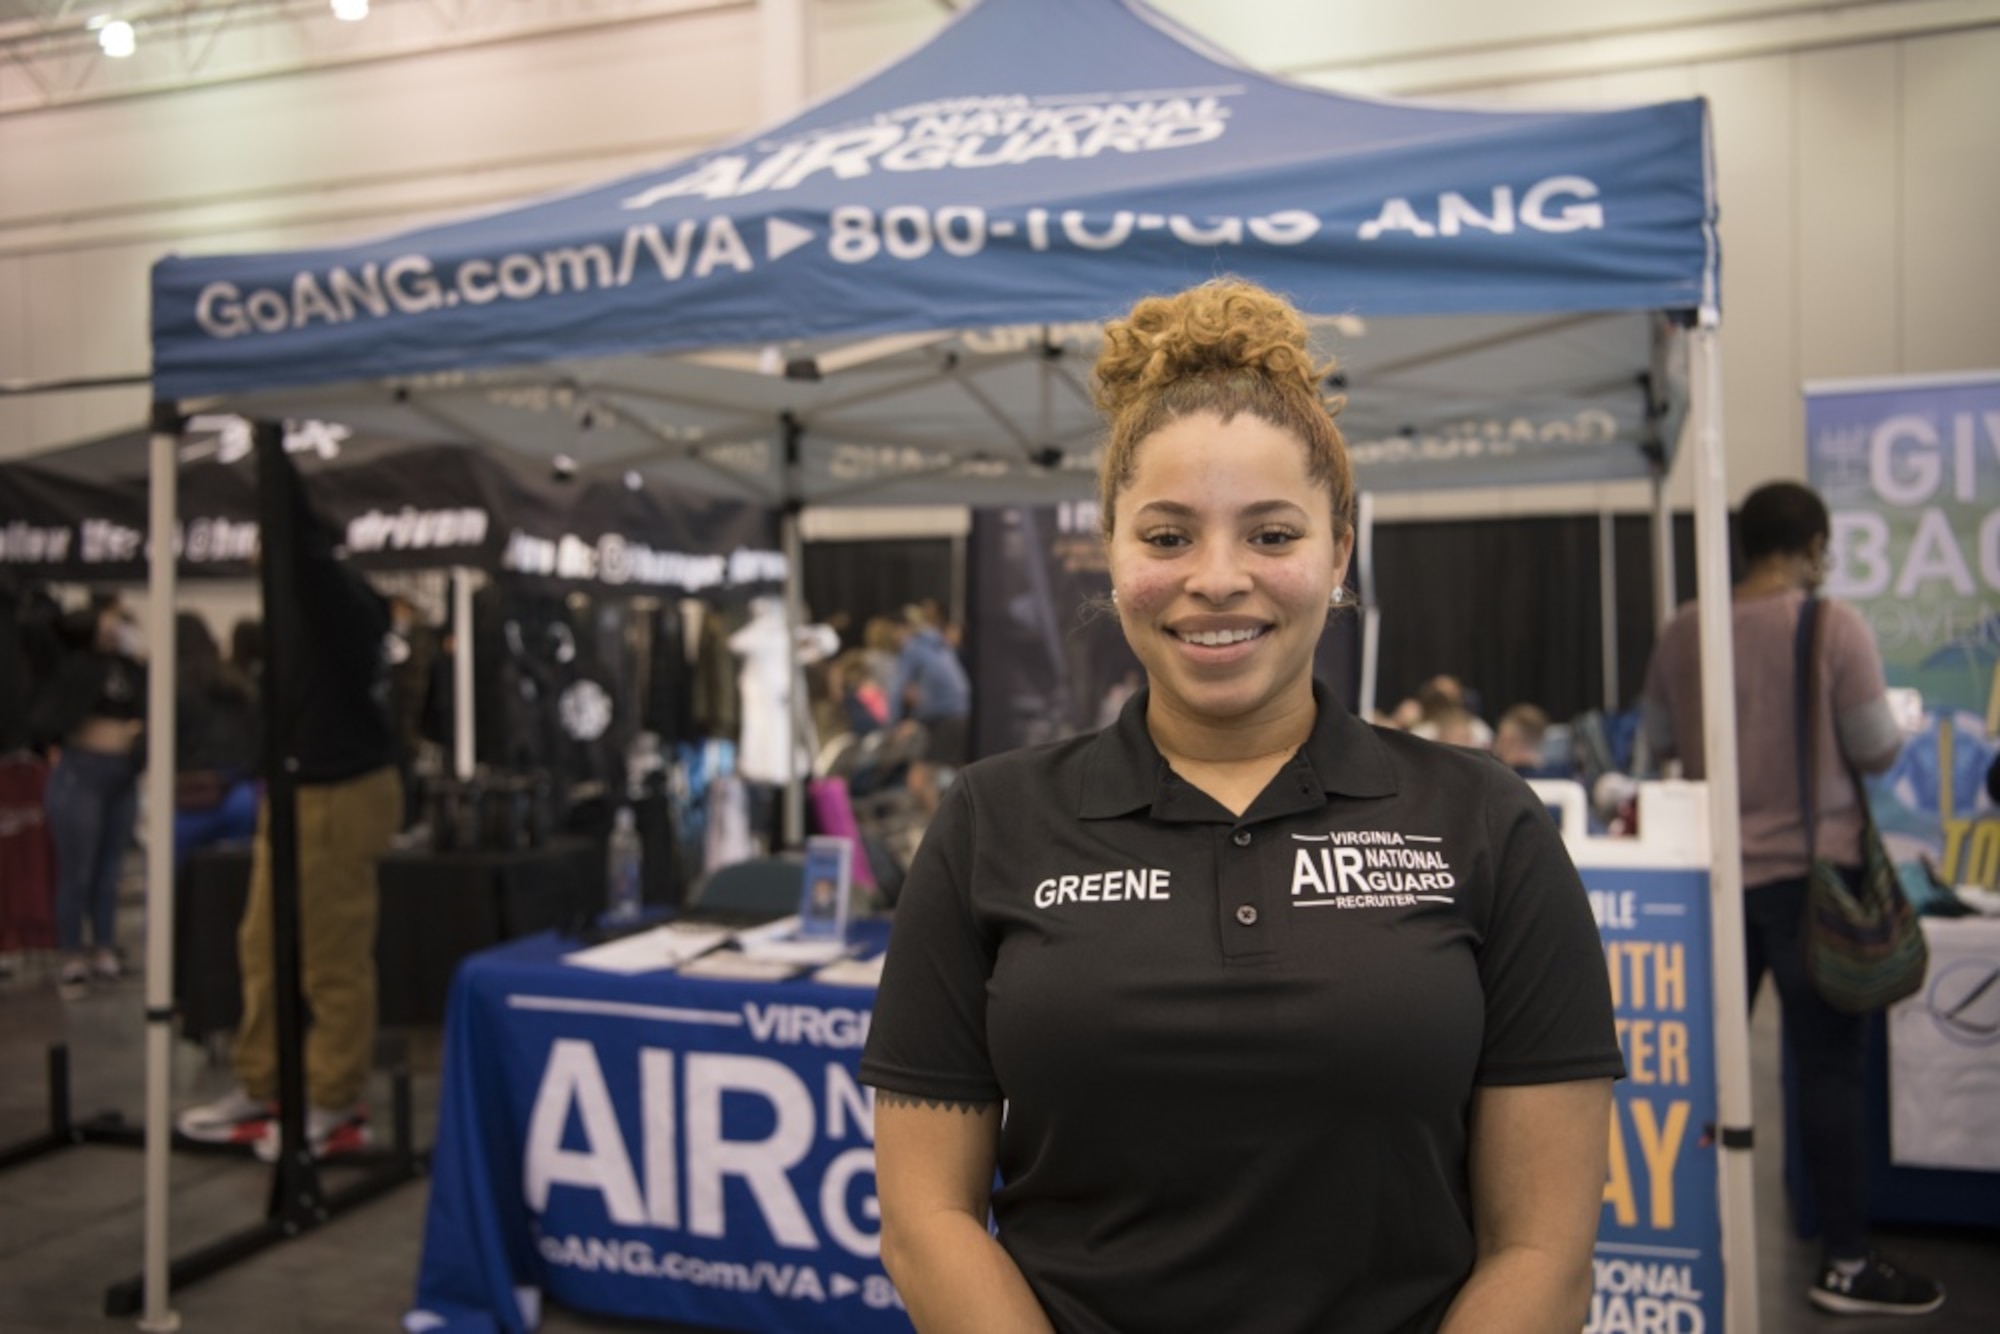 An Air National Guard recruiter is smiling in front of her tent at an event